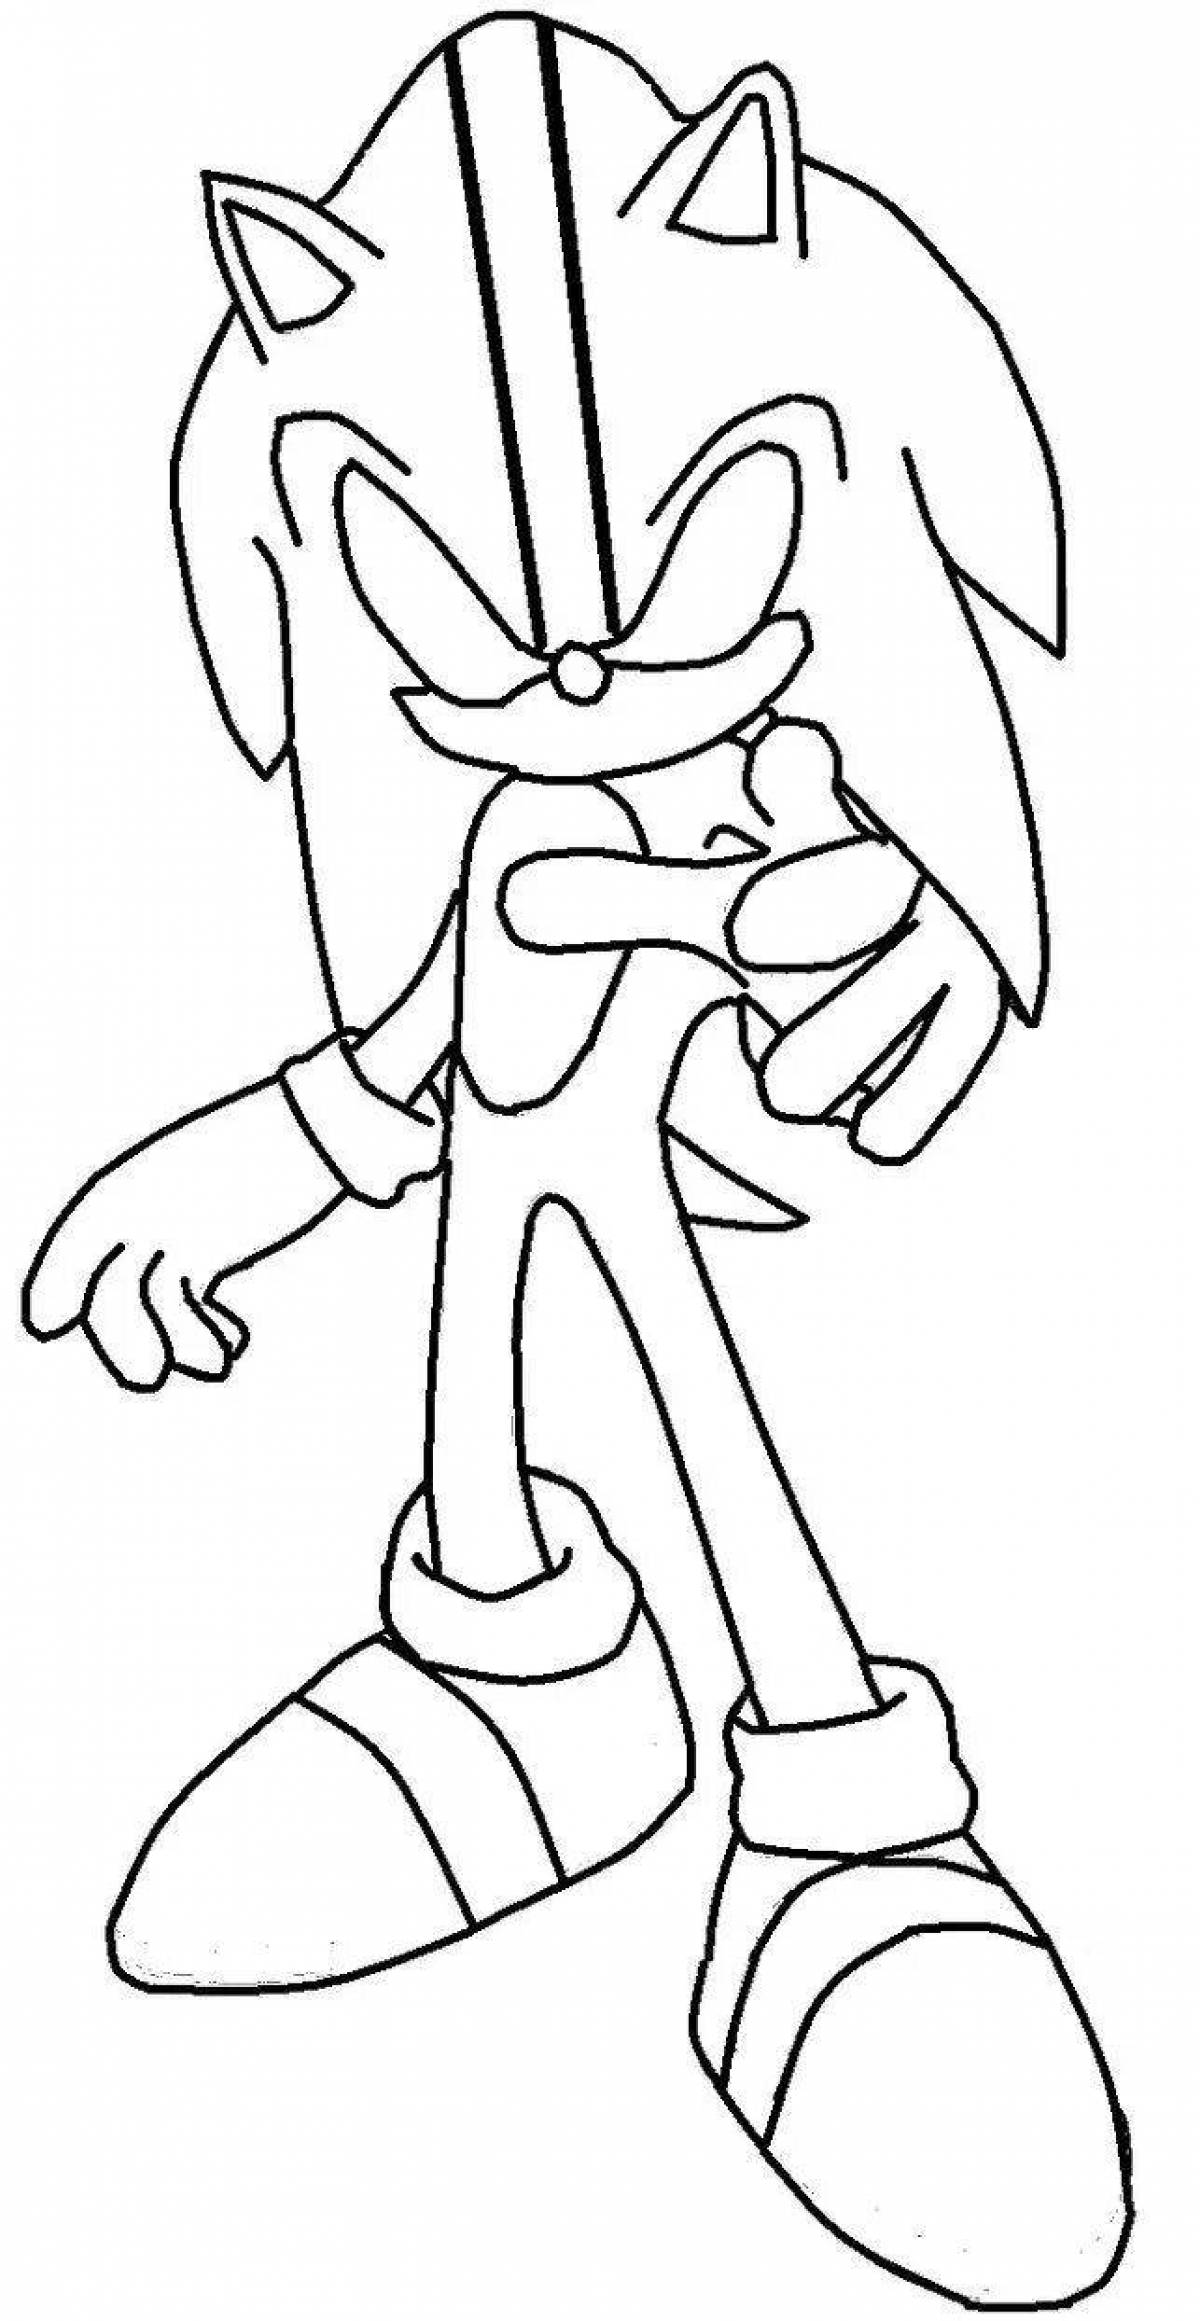 Exquisite sonic x z coloring book